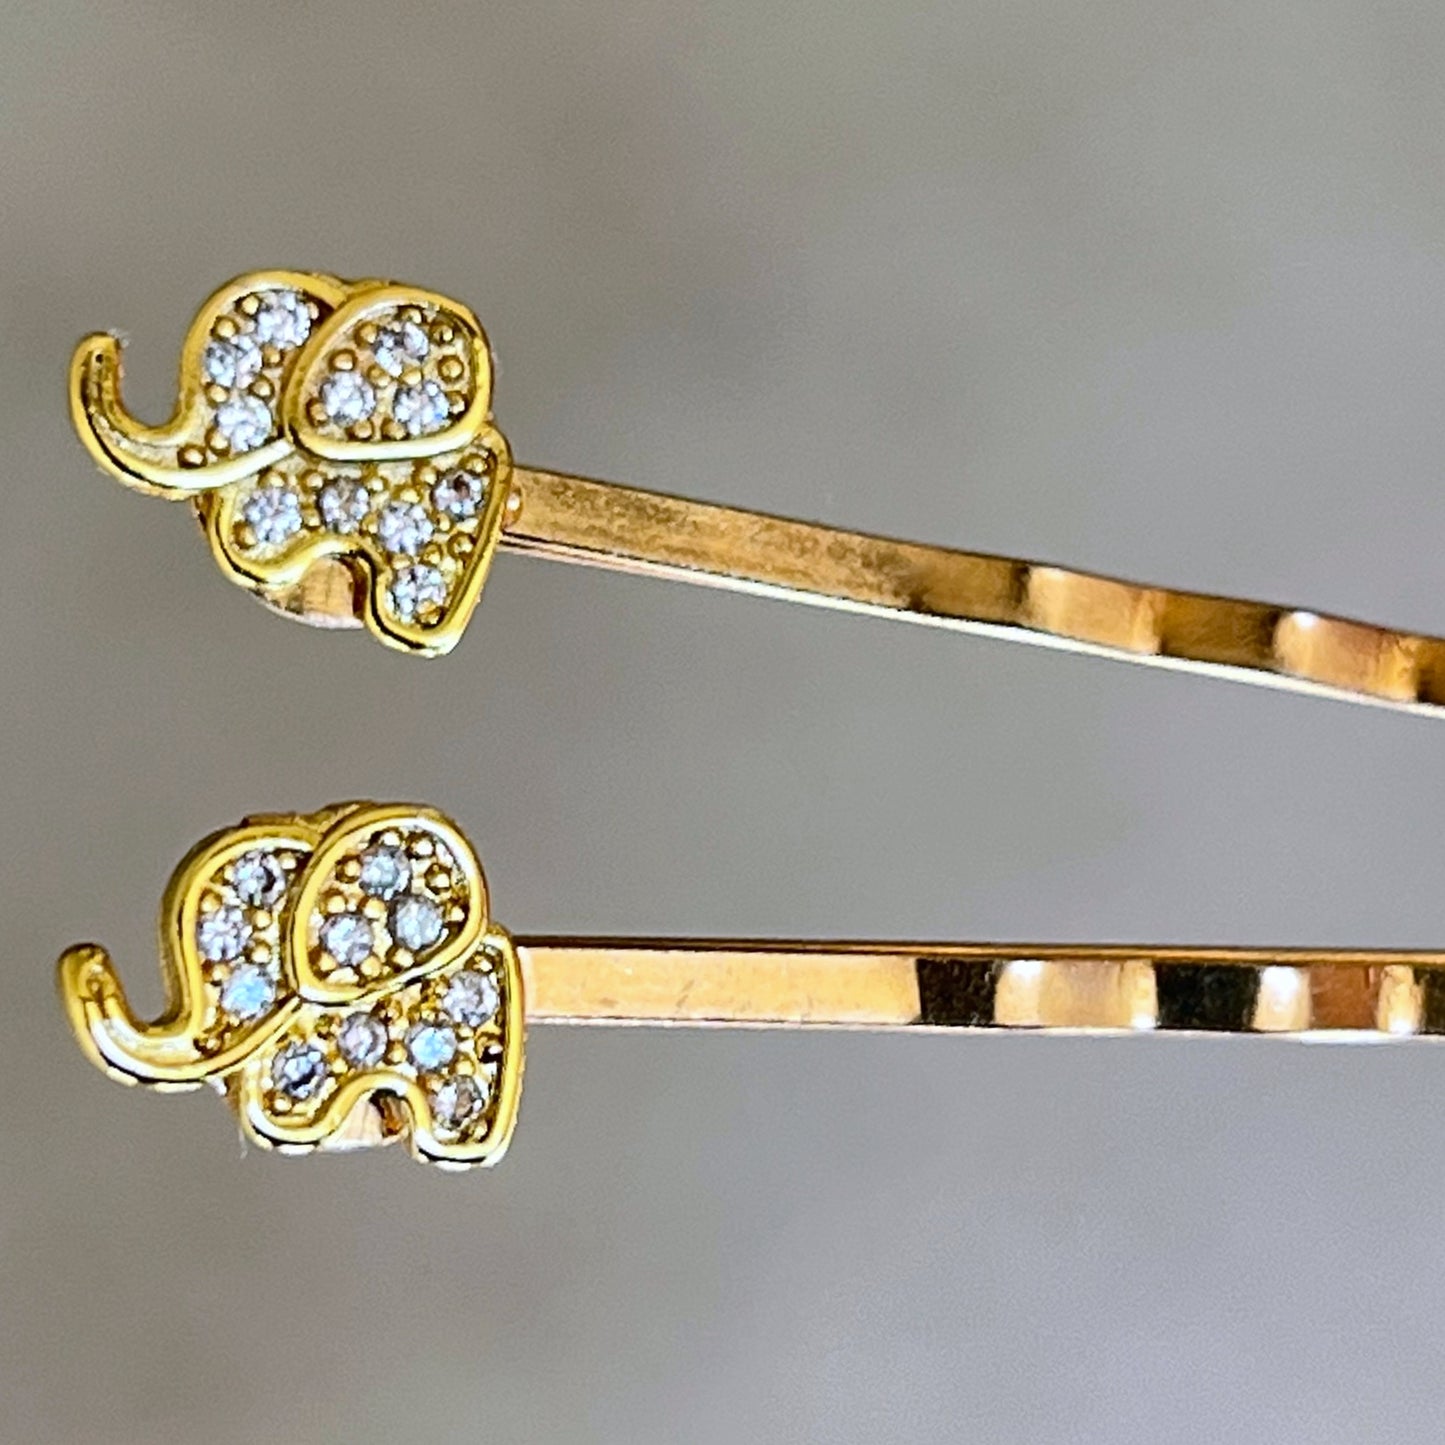 Tiny Gold Rhinestone Elephant Bobby Pins: Adorable Animal-inspired Accessories